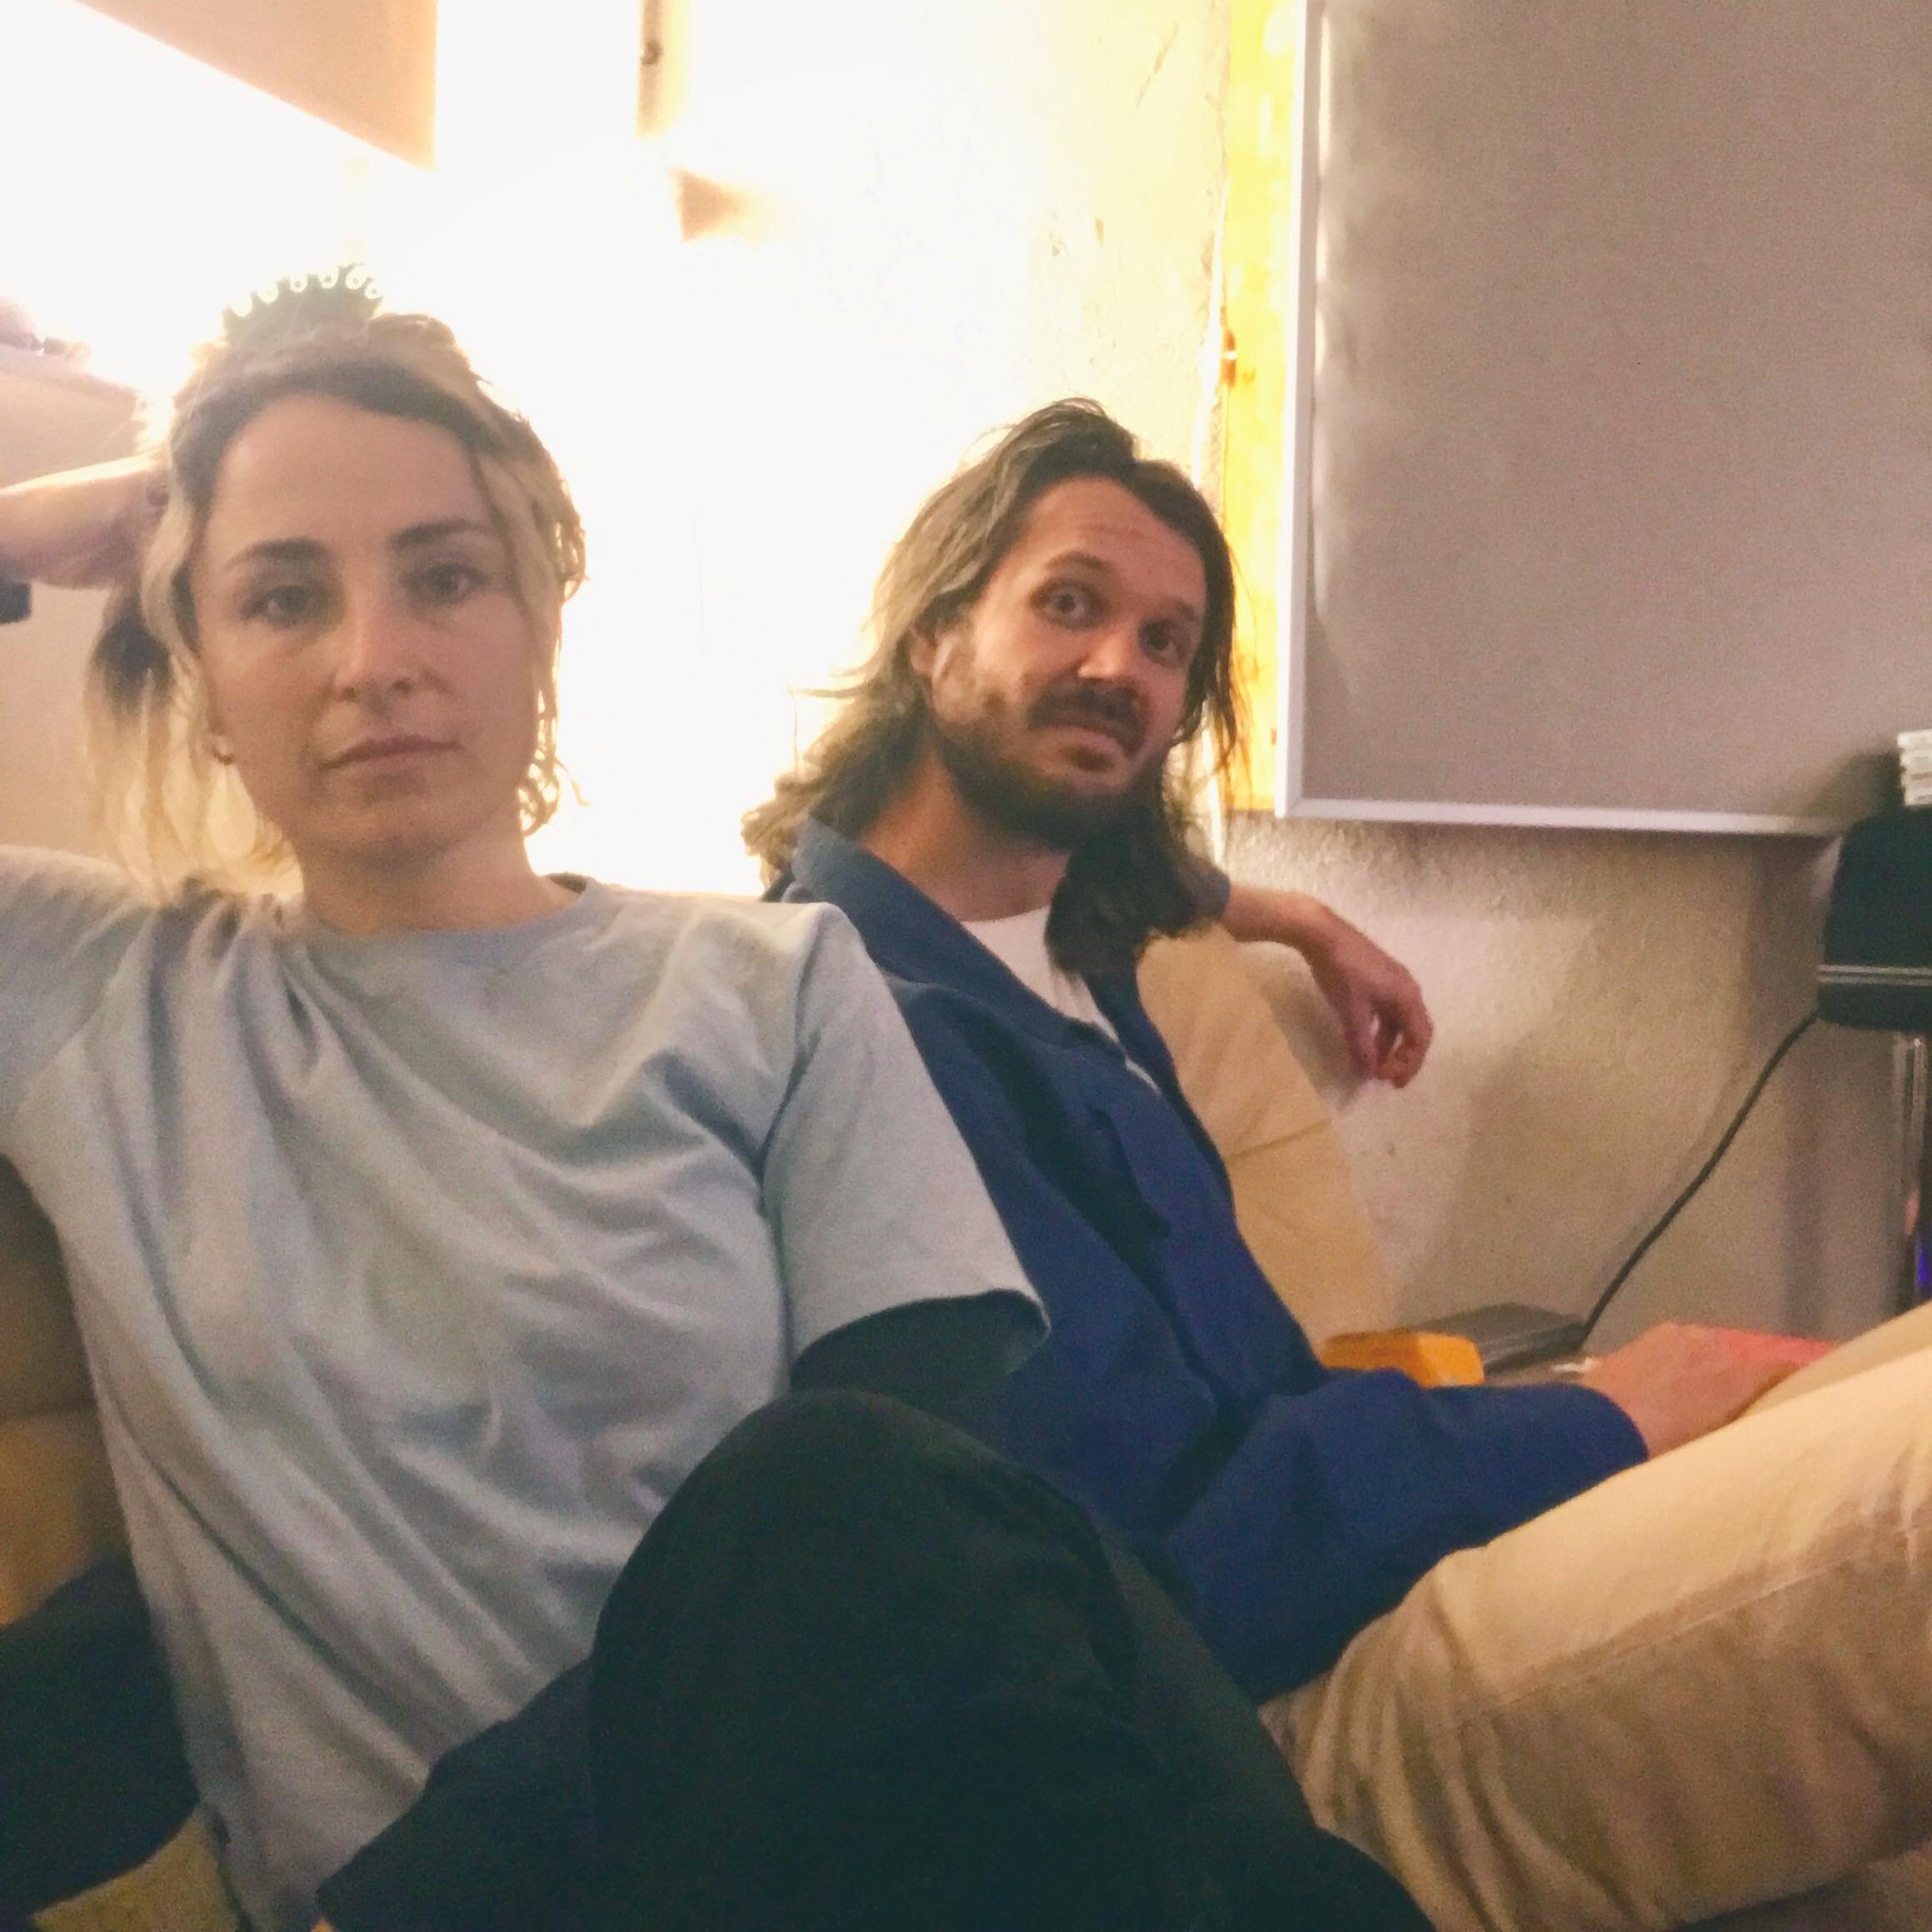 hello from the basement - RR is out today💥
a new song by @haubisongs with some hushed vocal layers by yours truly. an EP is coming soon. 

but mostly, we're recording Haubi Songs' new album in a basement in Winterthur these days. There is no way of 